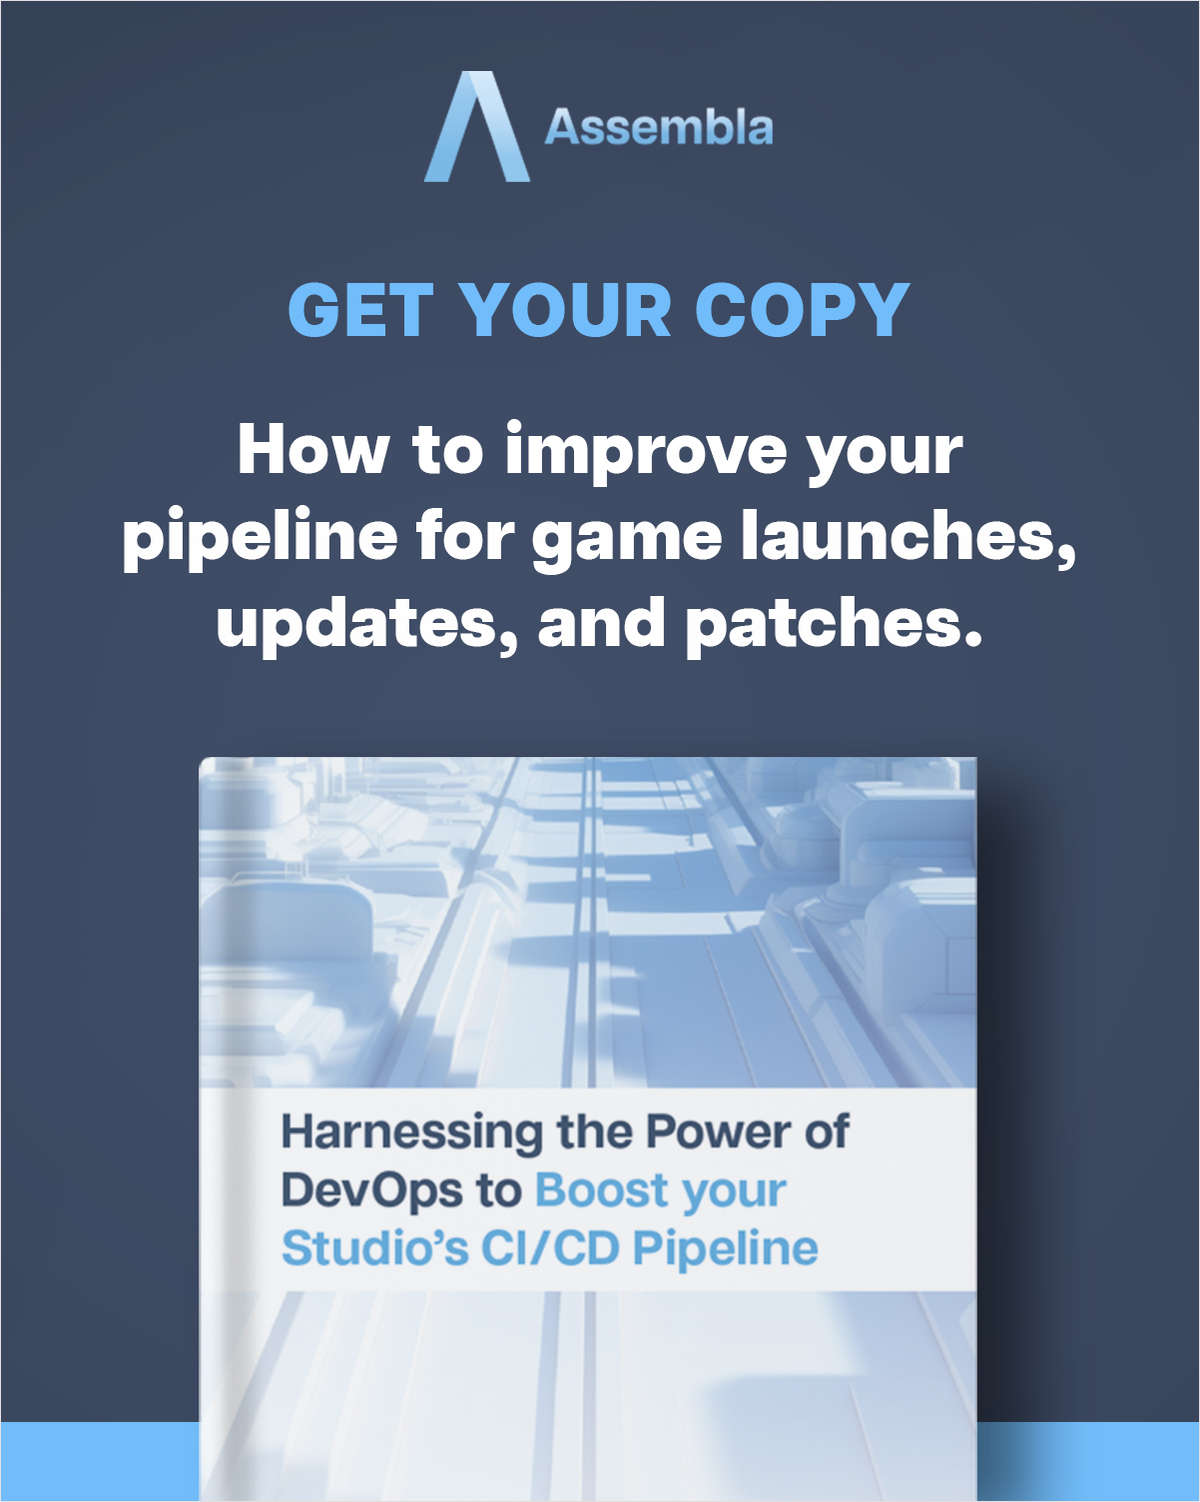 Harnessing the Power of DevOps to Boost your Studio's CI/CD Pipeline